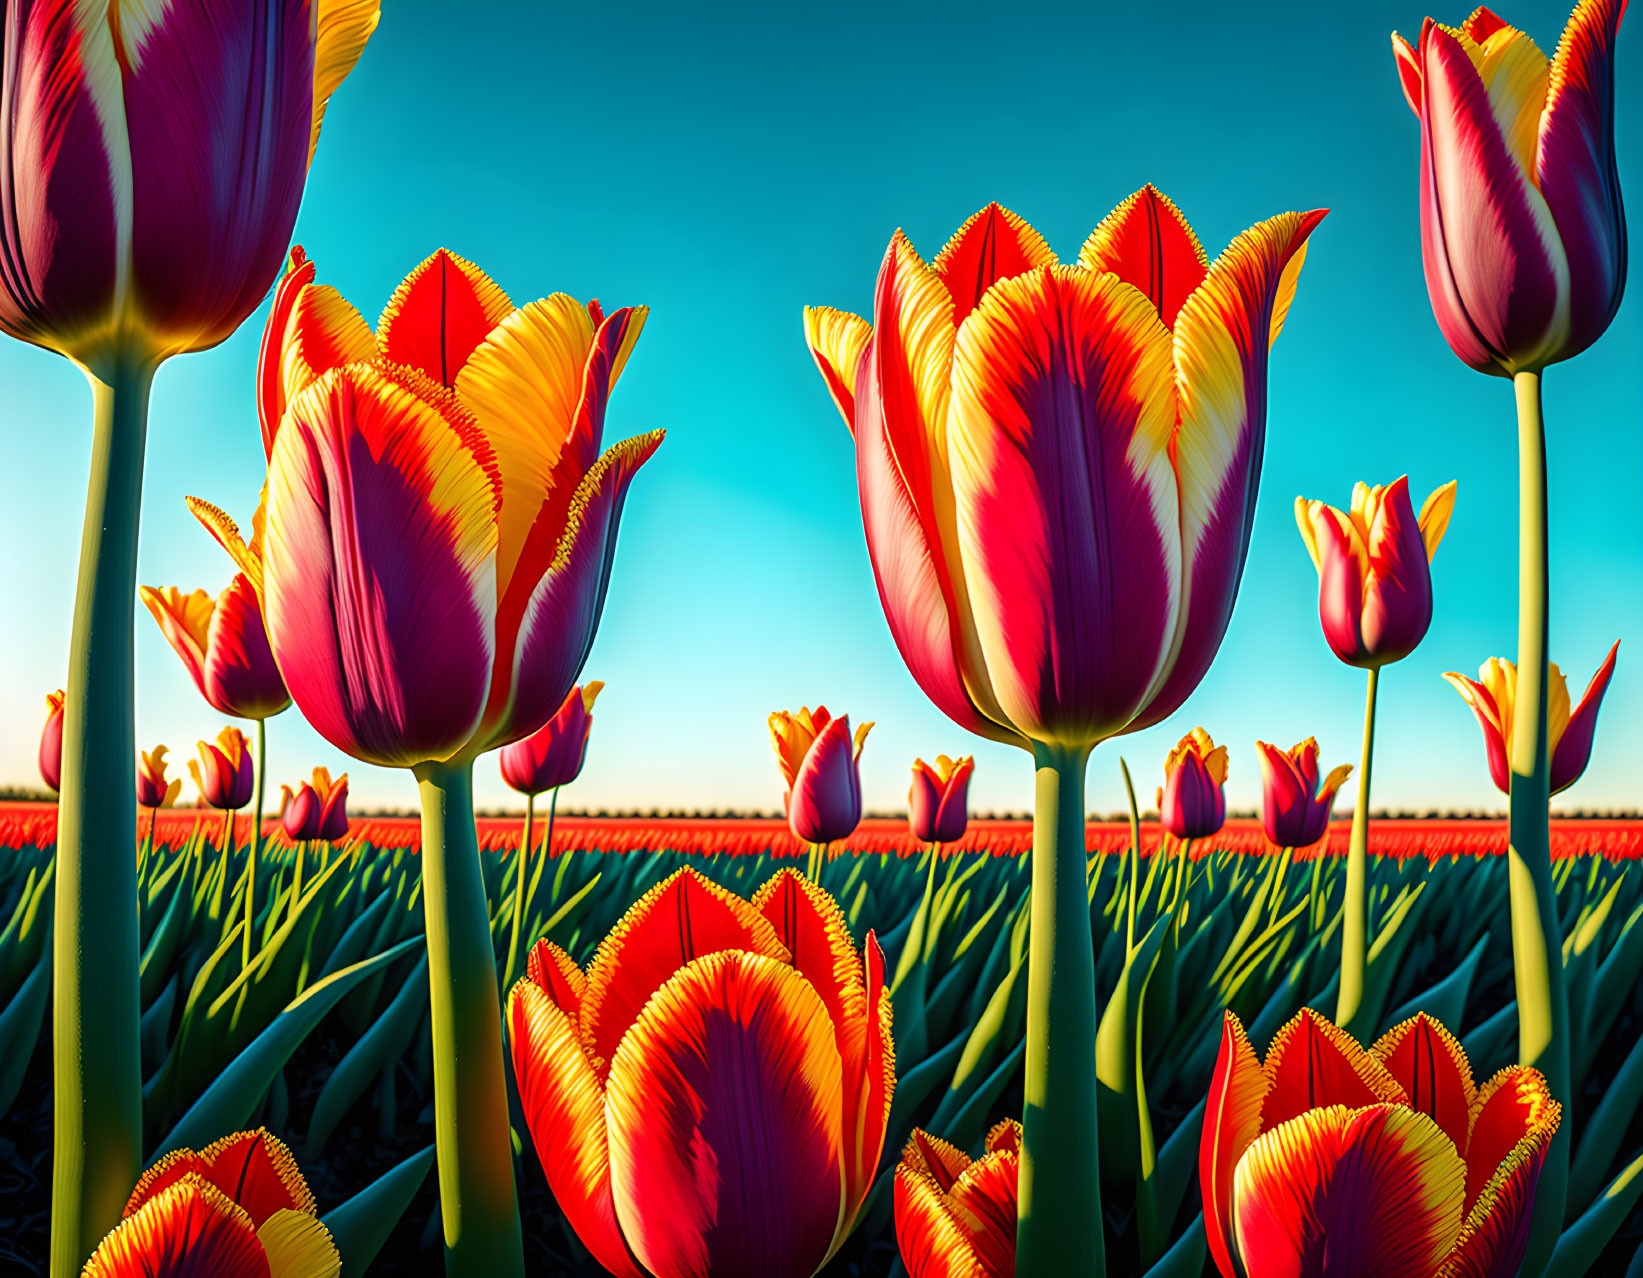 Colorful red and yellow tulip field under clear blue sky